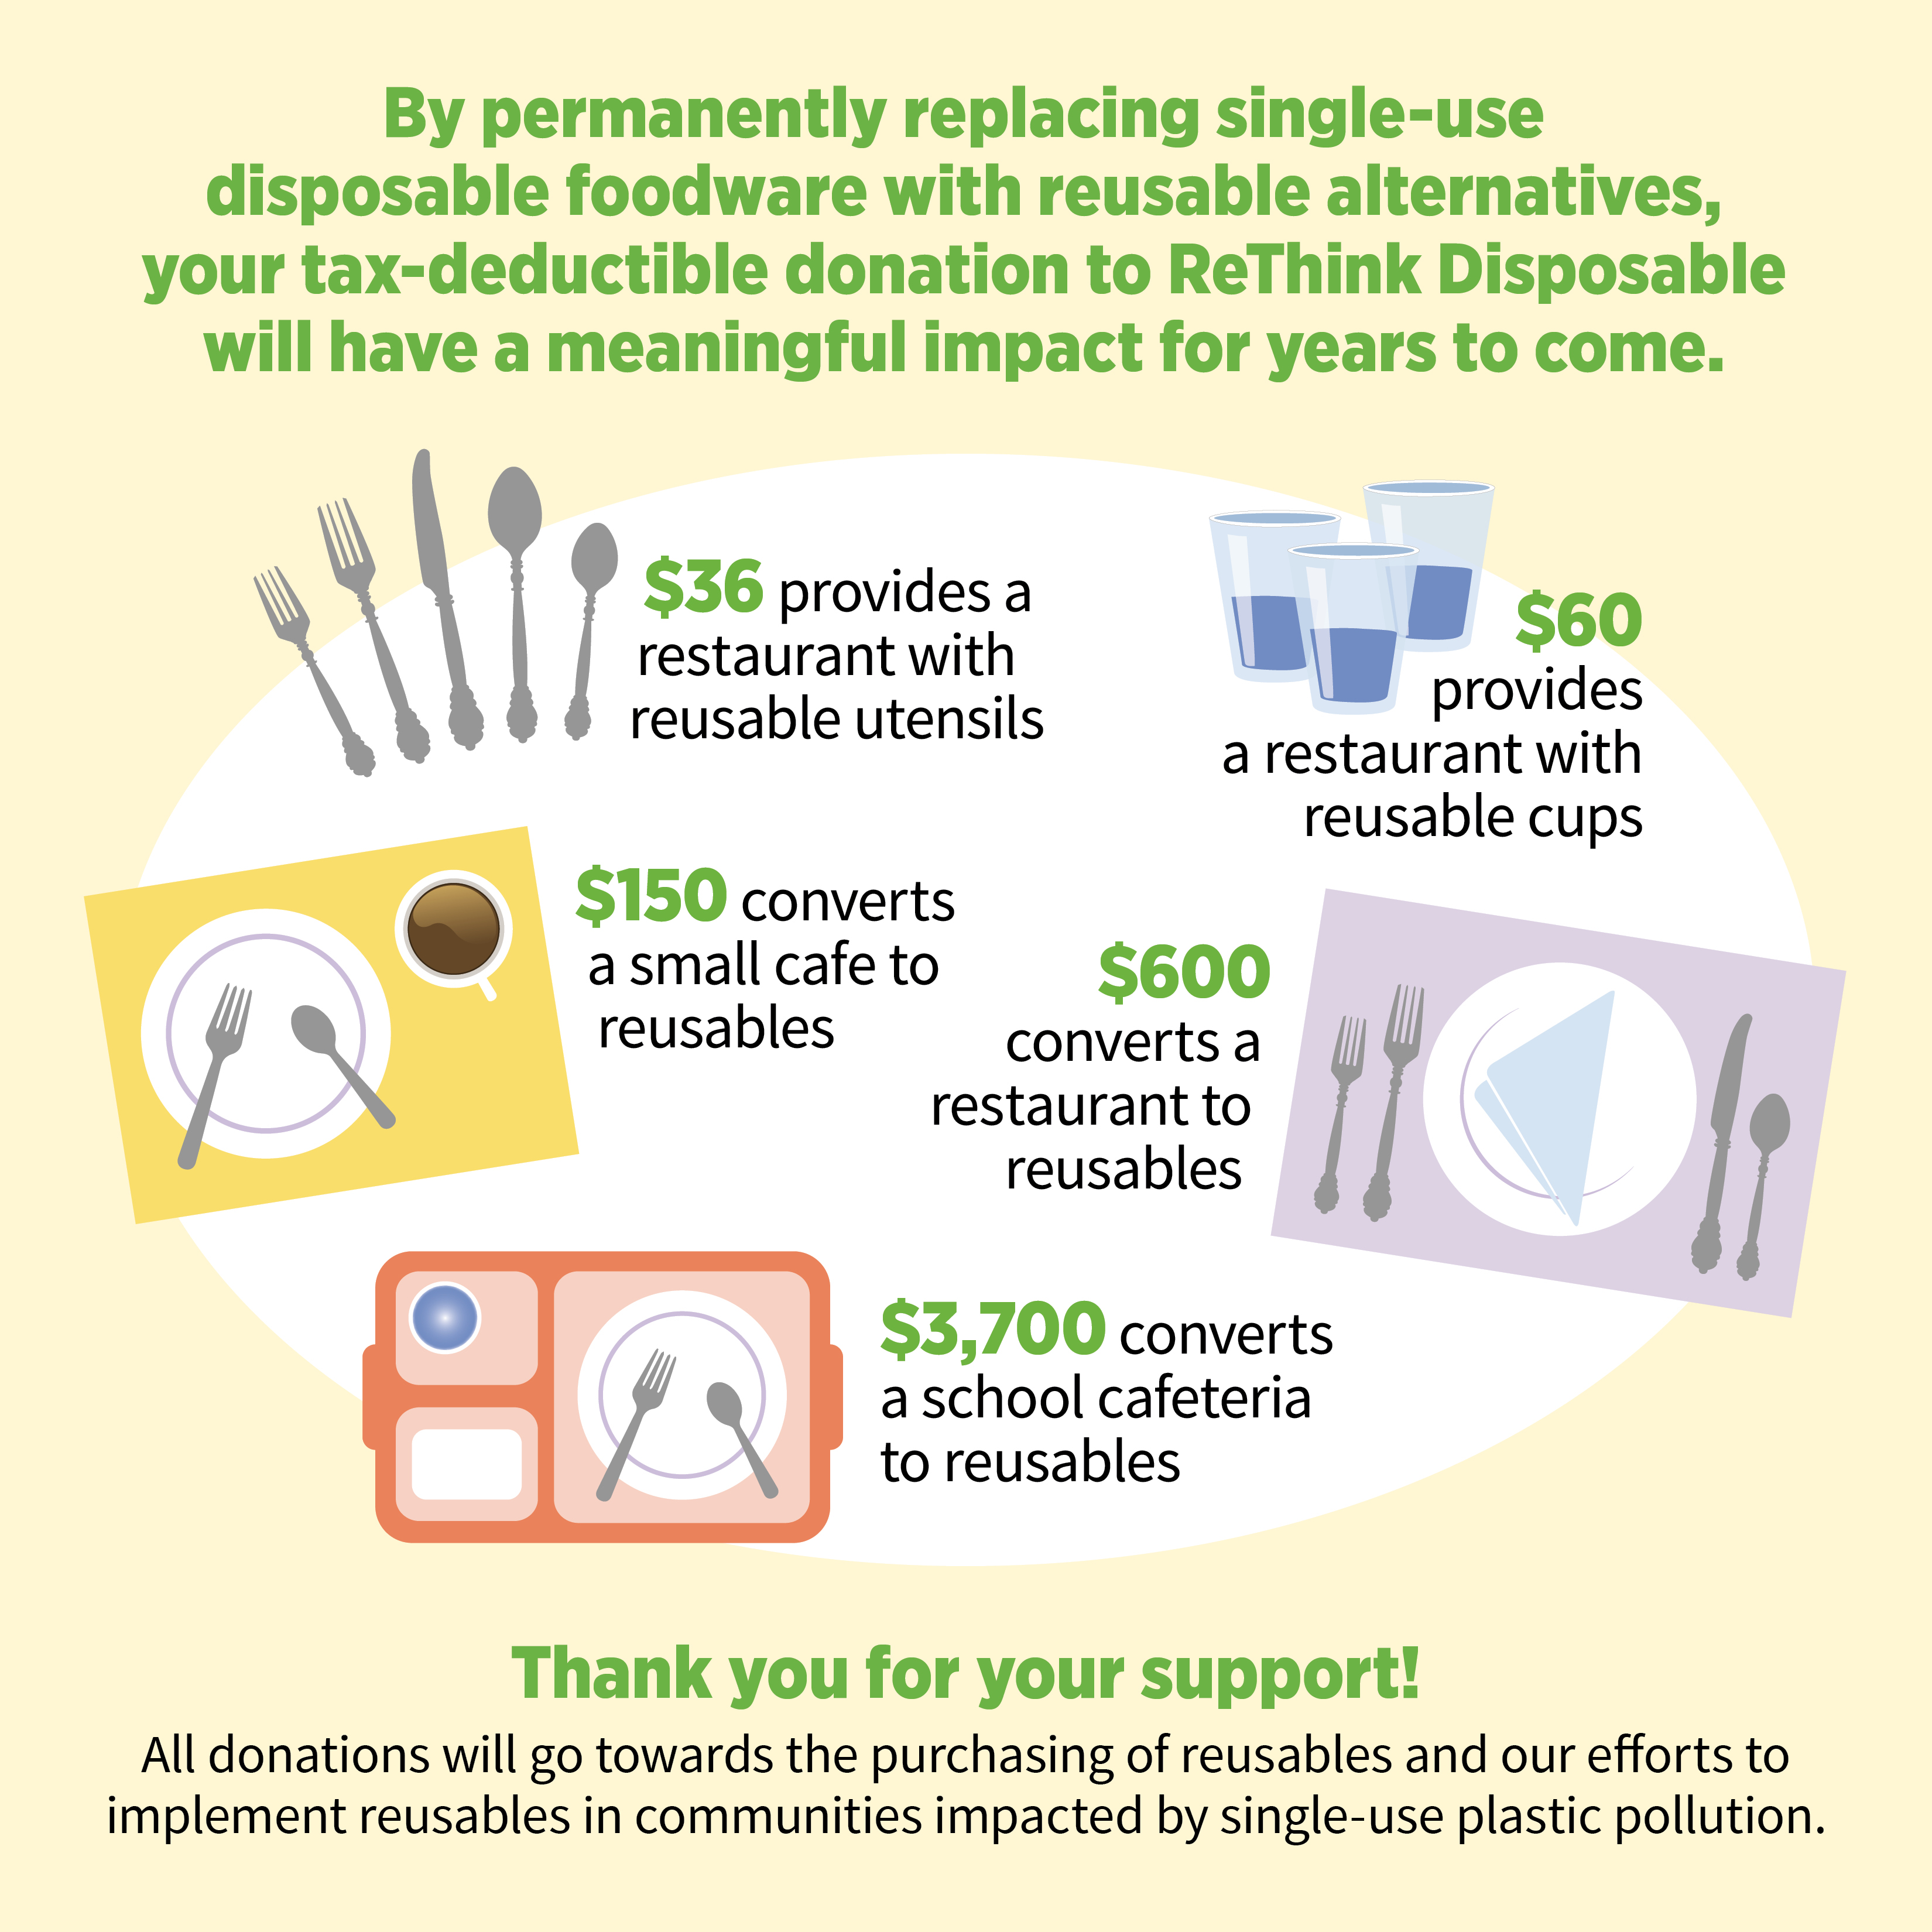 By permanently replacing single-use disposable foodware with reusable alternatives, your tax-deductible donation to ReThink DIsposable will have a meaningful impact for years to come.